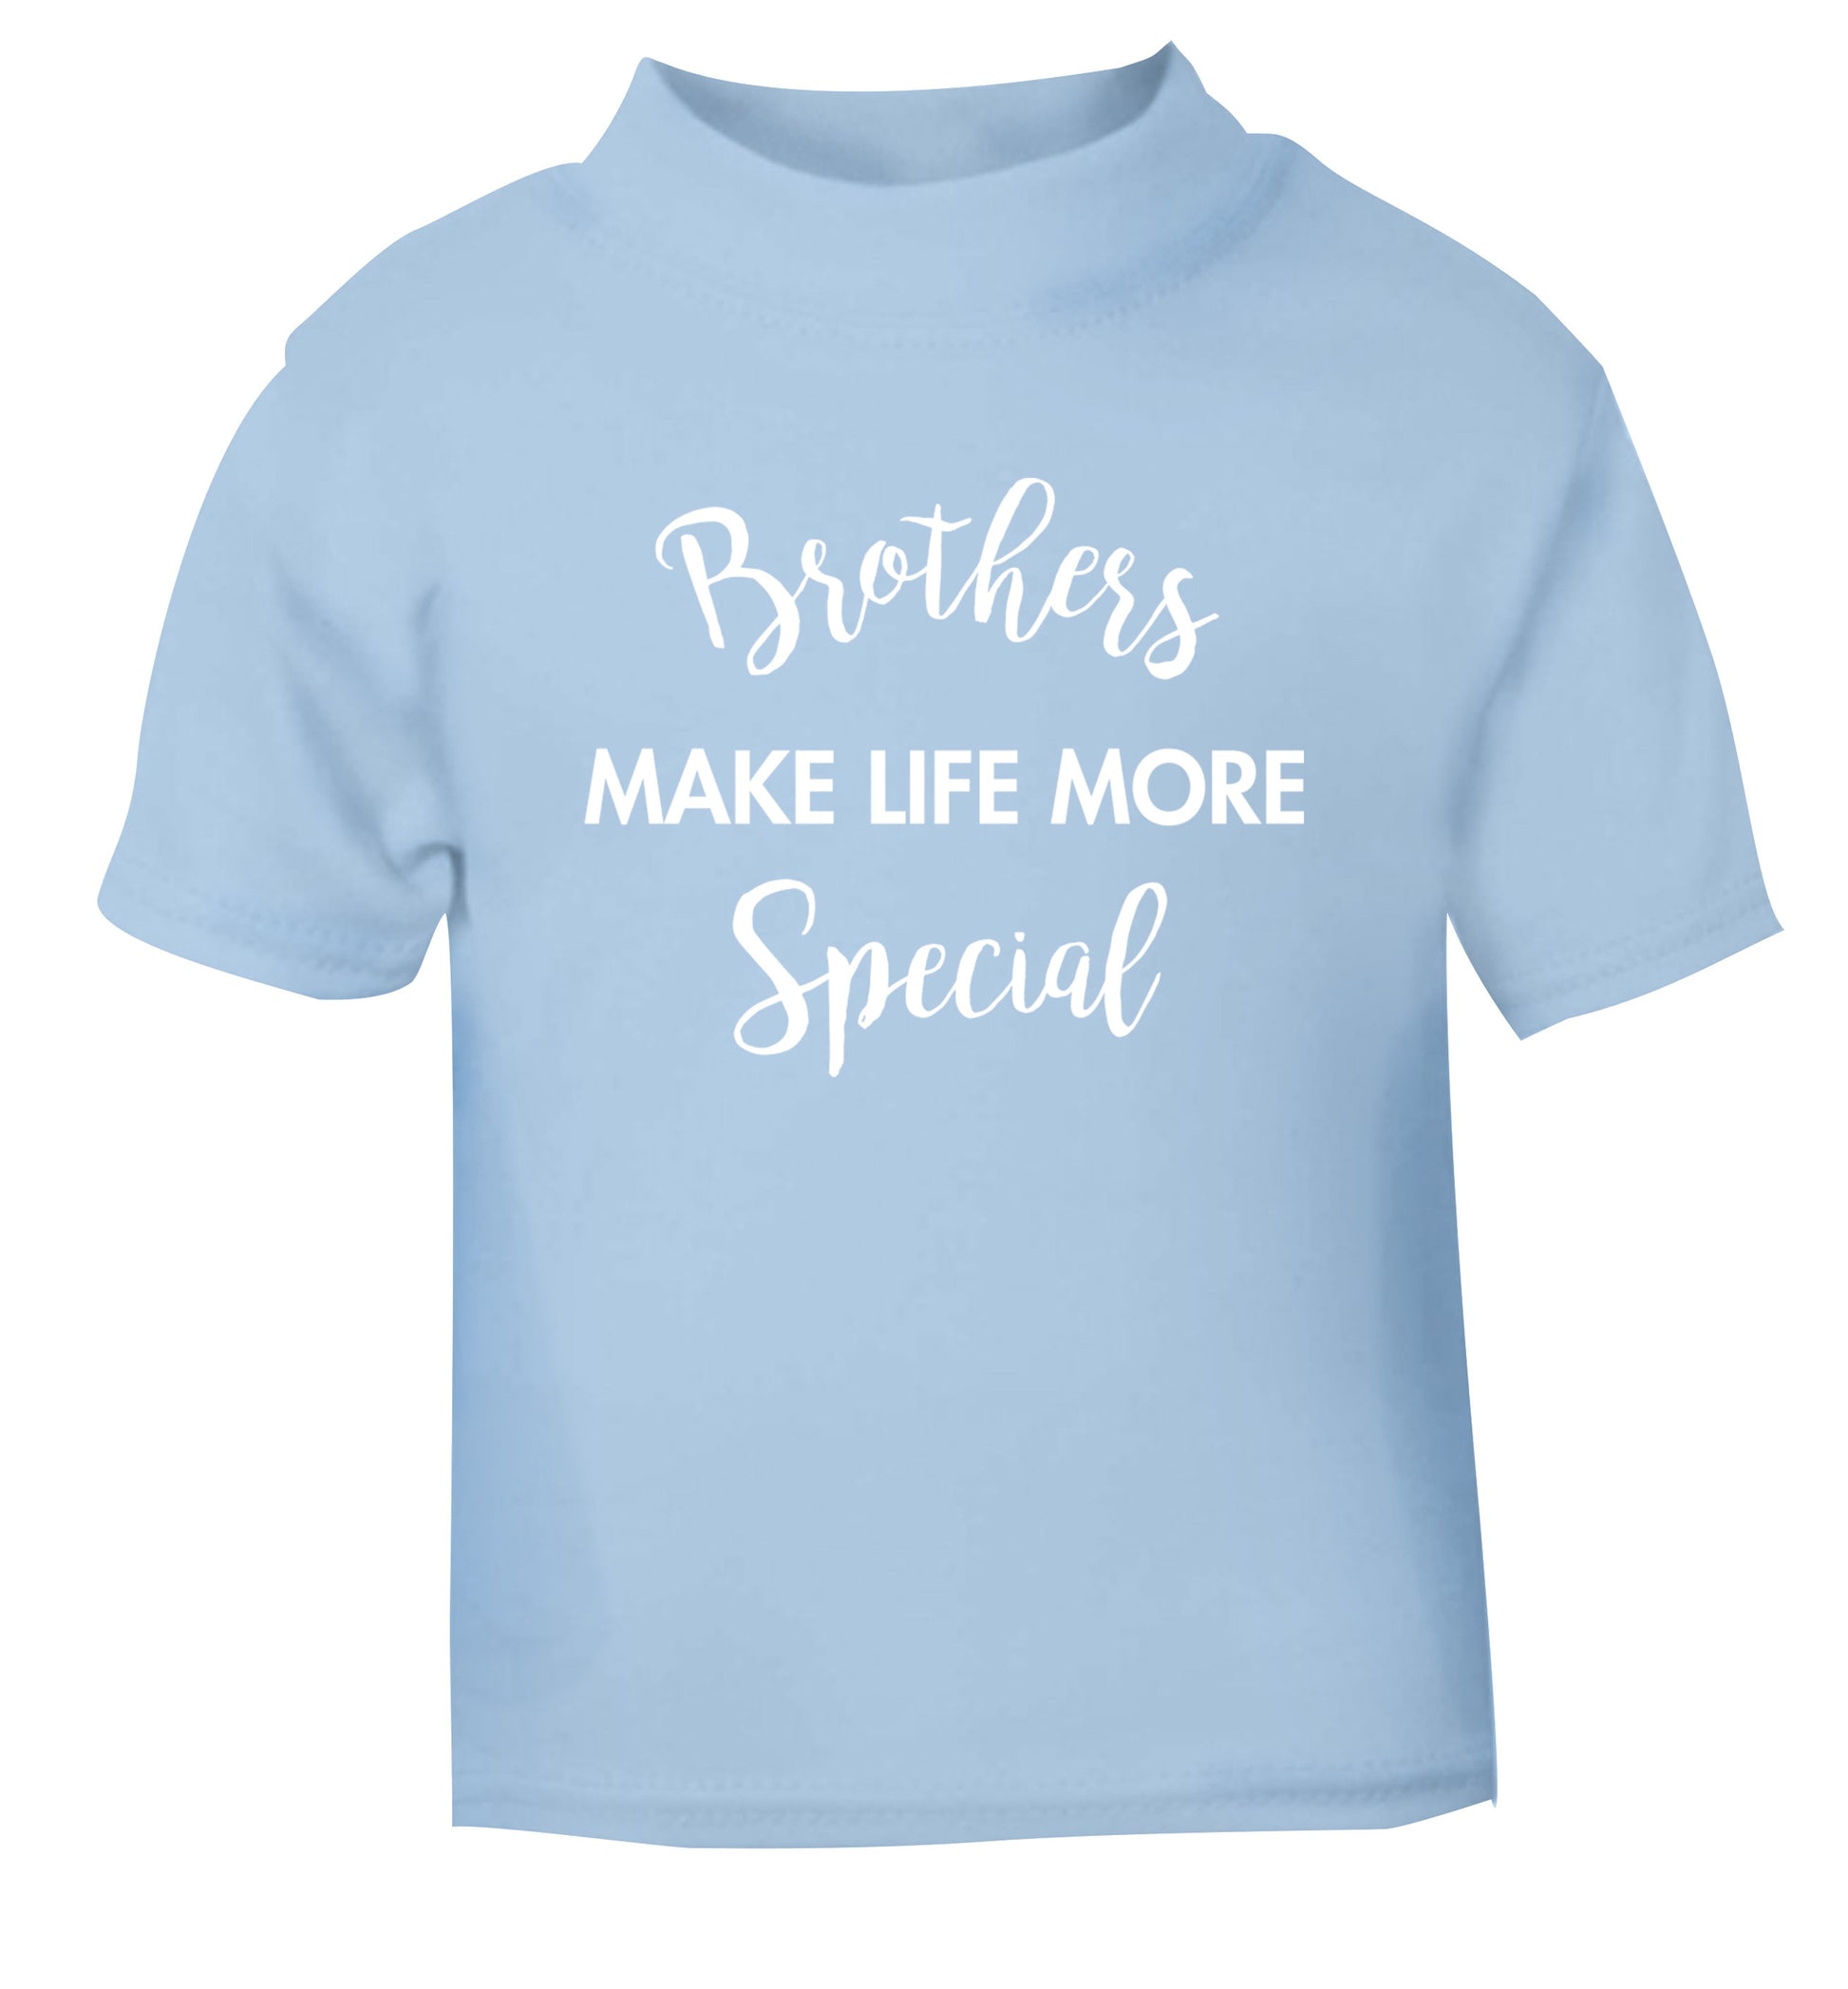 Brothers make life more special light blue Baby Toddler Tshirt 2 Years